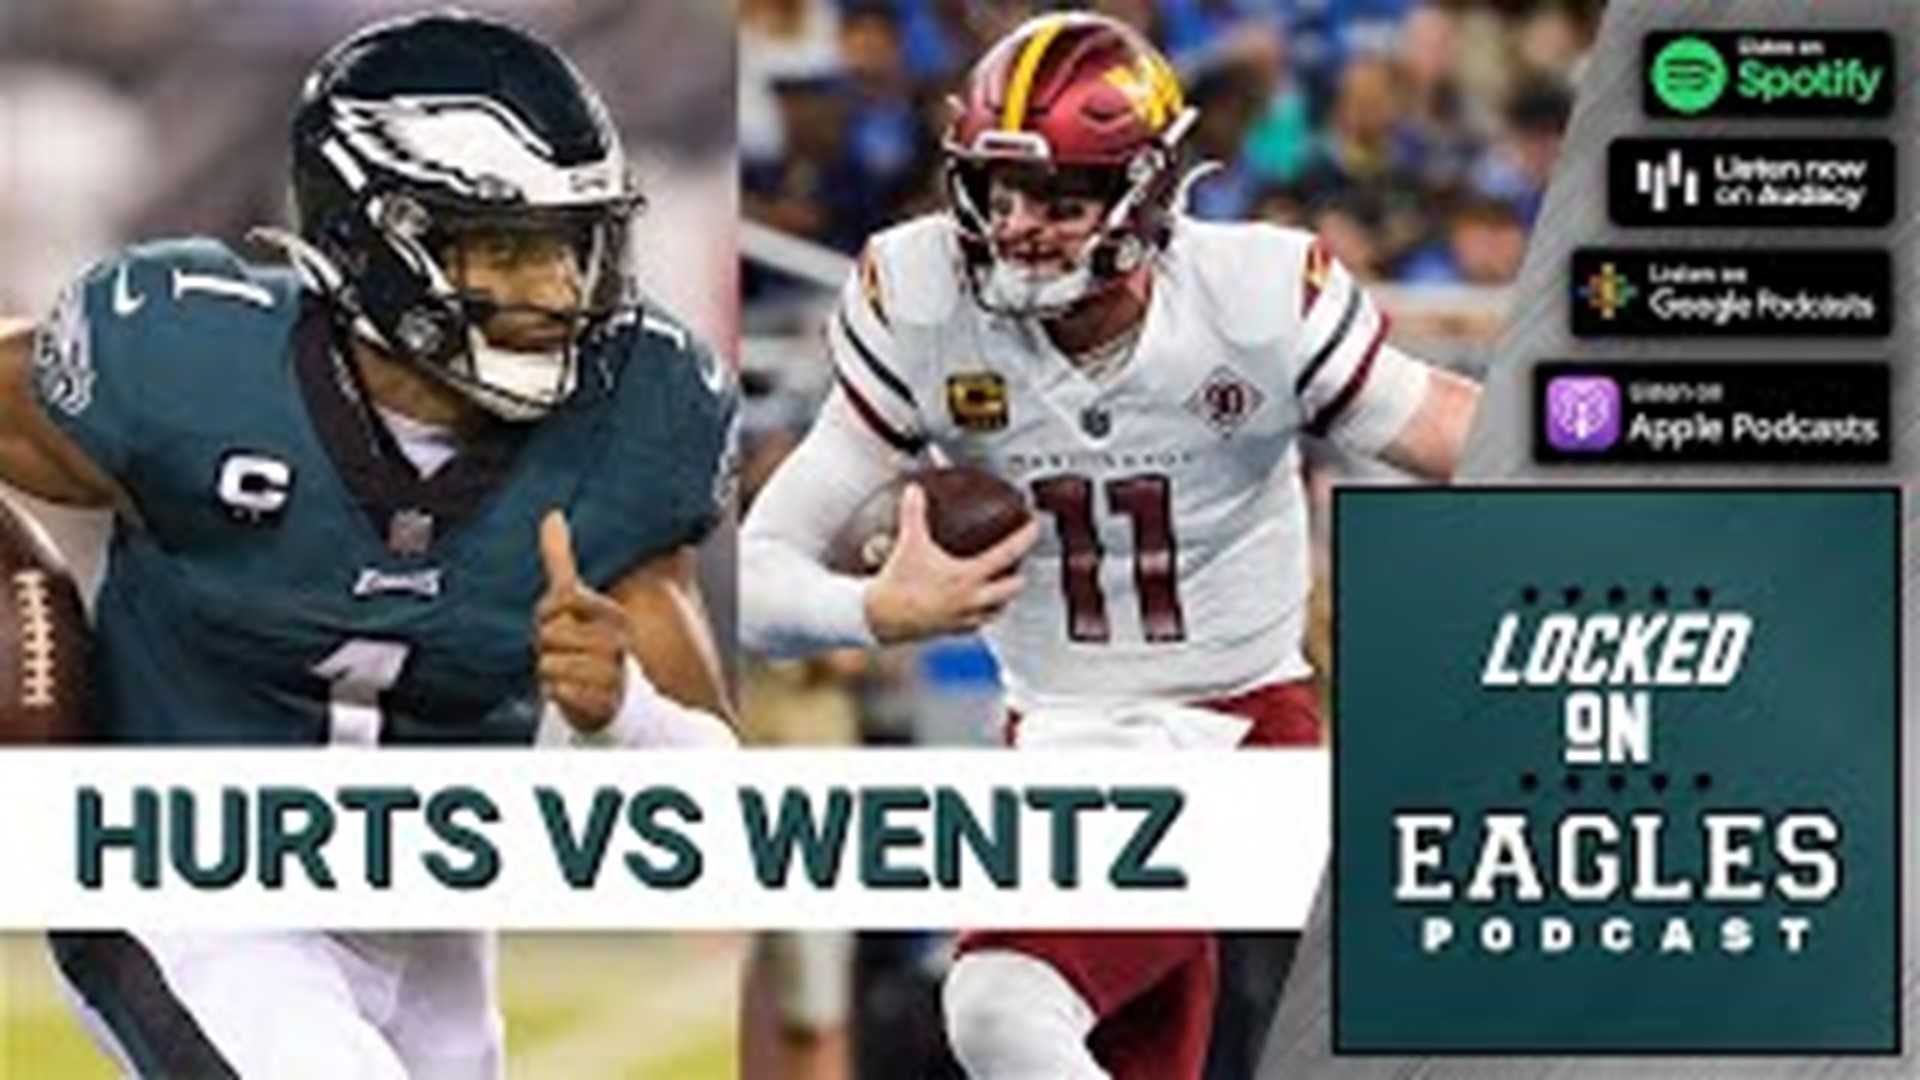 The Week 3 NFC East battle between the Philadelphia Eagles and Washington Commanders features an intense, personal matchup between Jalen Hurts and Carson Wentz.